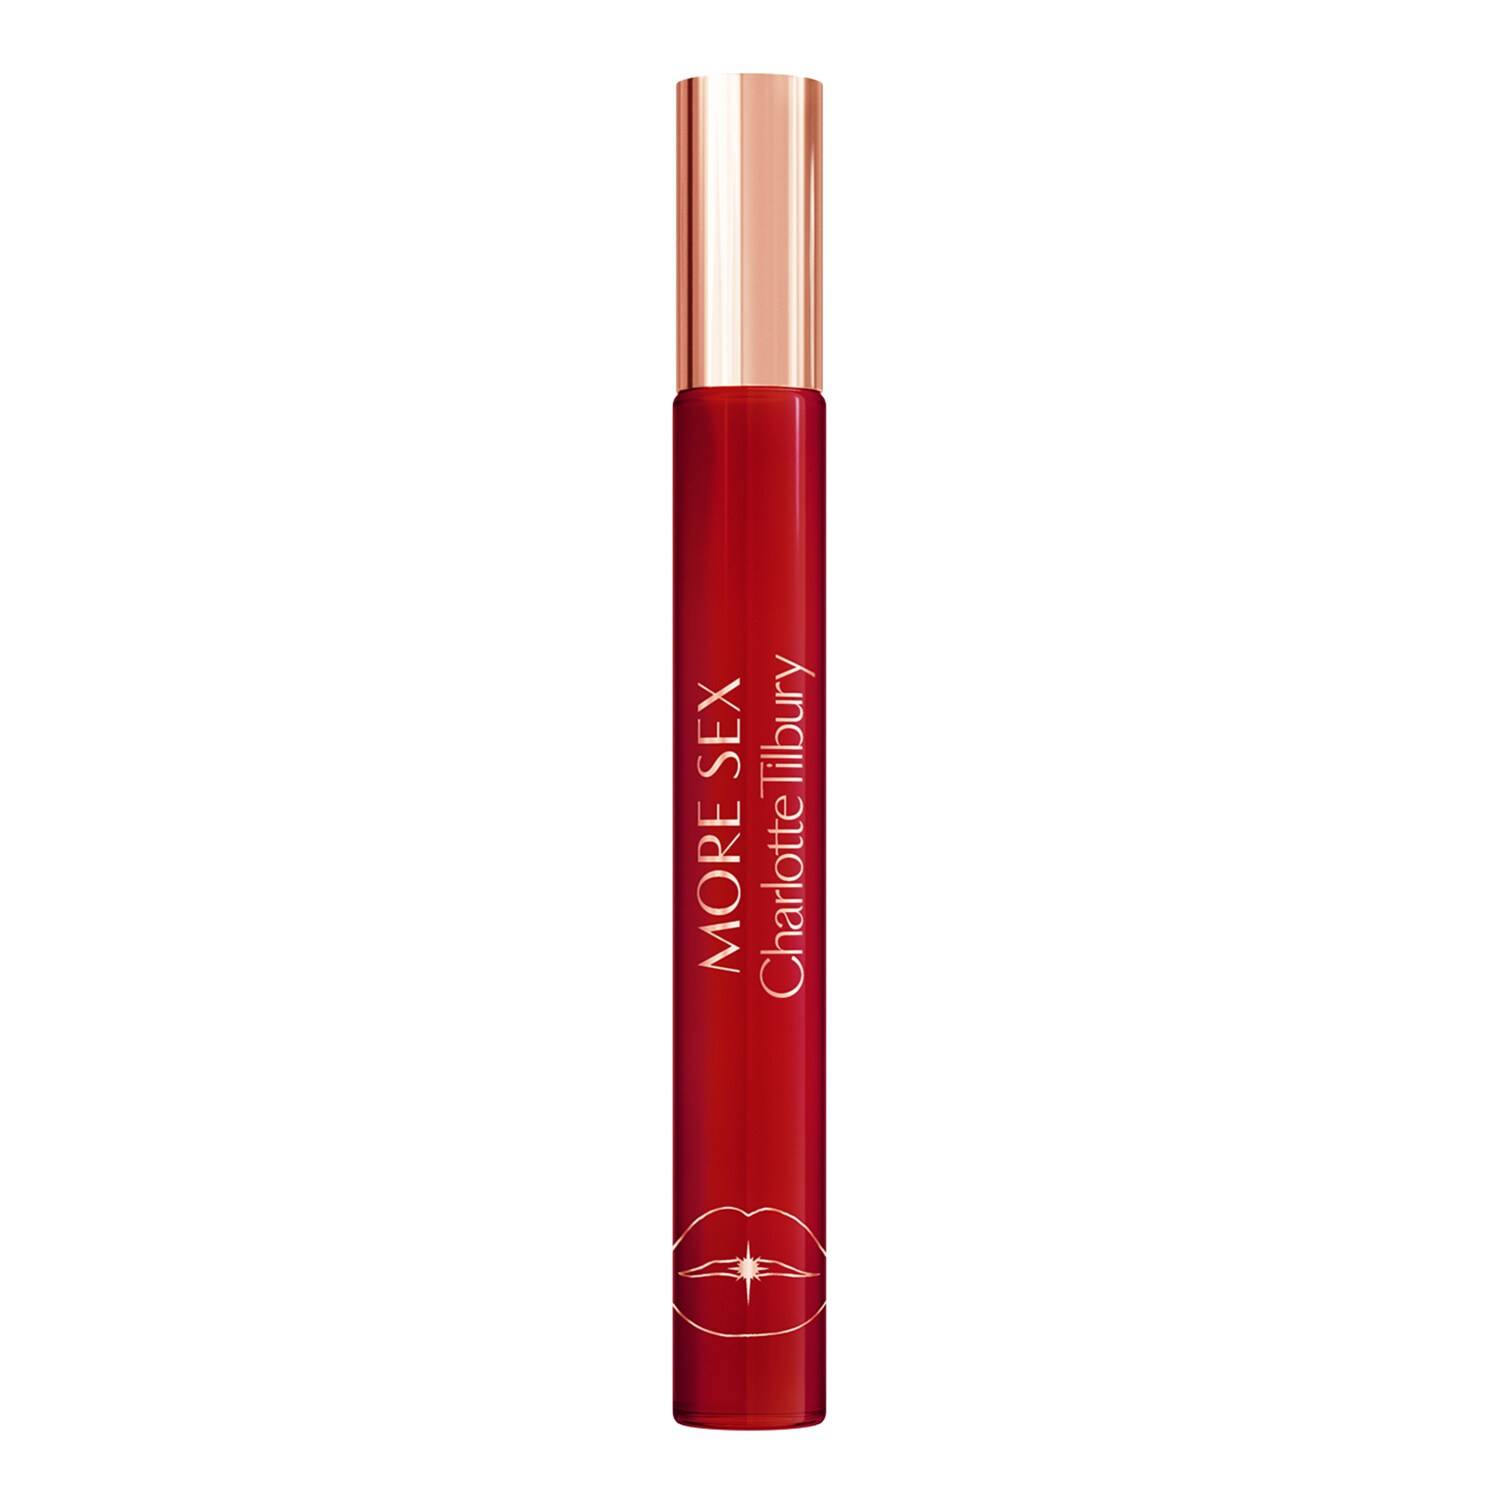 CHARLOTTE TILBURY Law of Attraction Fragrance More Sex 10ml